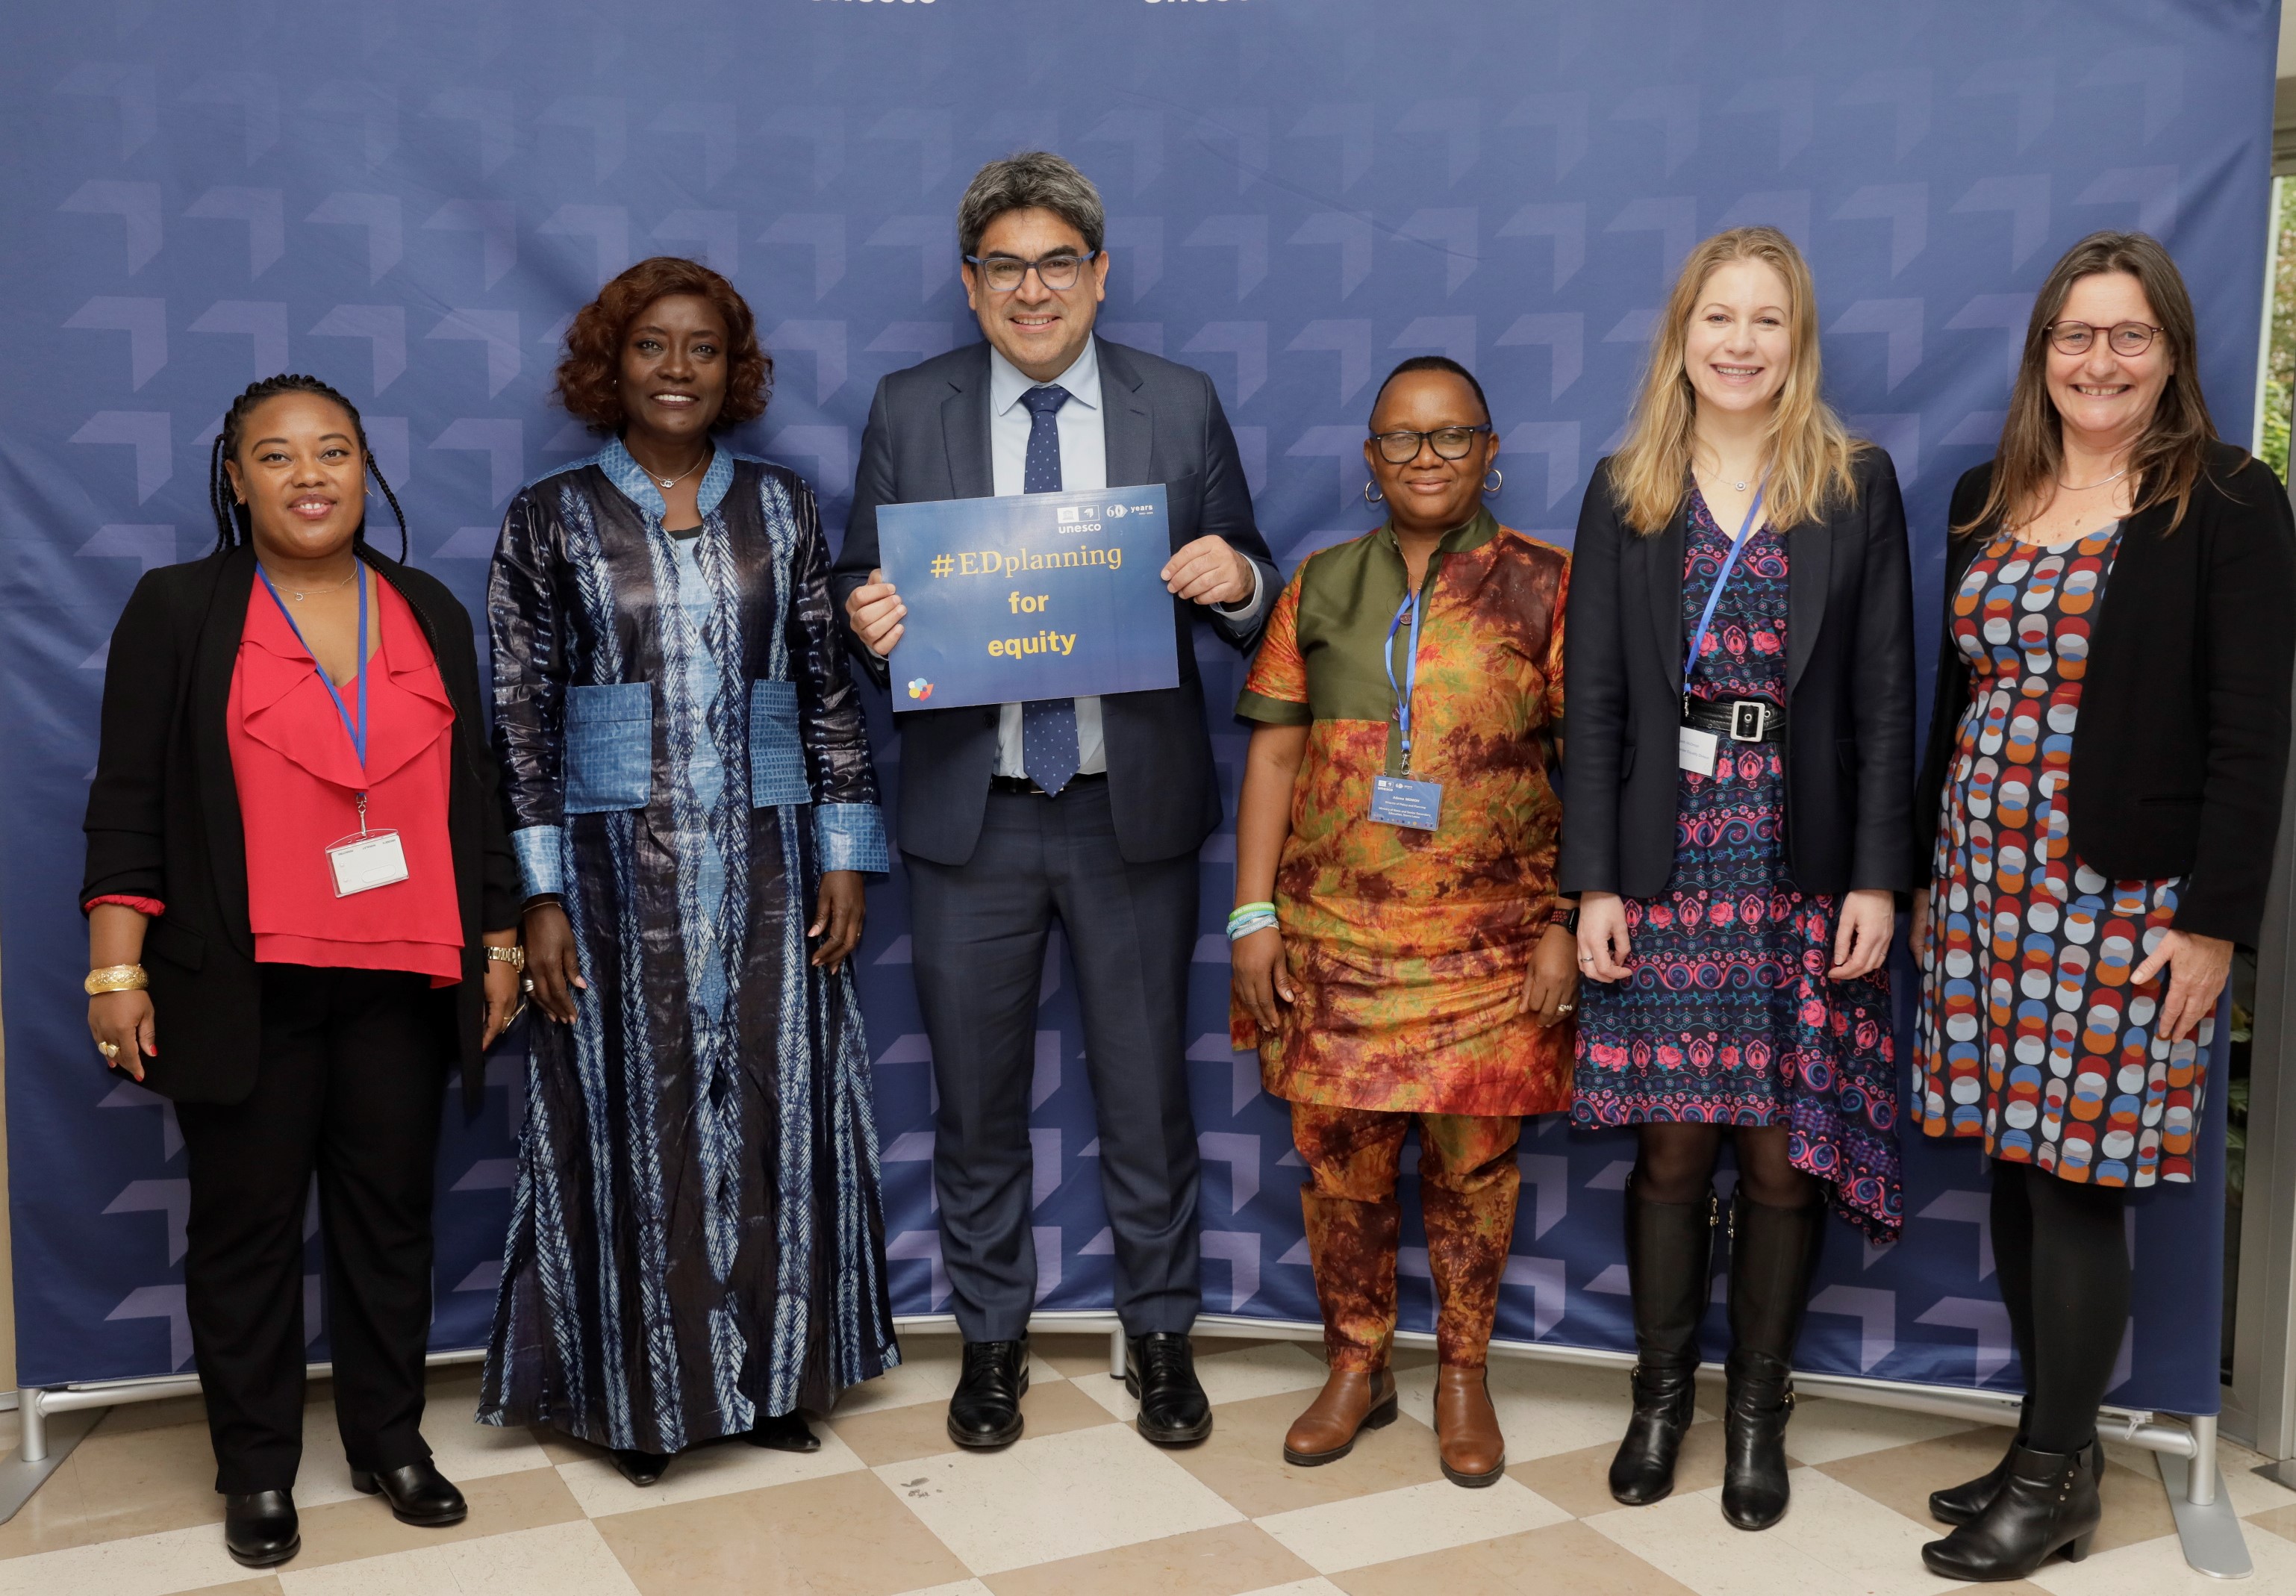 ©IIEP-UNESCO Caption: IIEP Director Martín Benavides with speakers of the panel session on equity at IIEP's 60th Anniversary Symposium. From left to right: Fabricia Devignes (IIEP), H.E. Ms Mariatou Koné (Minister of National Education and Literacy, Côte d'Ivoire), Martín Benavides (IIEP), Adama Momoh (Ministry of Basic and Senior Secondary Education, Sierra Leone), Elspeth McOmish (UNESCO), and Pauline Rose (IIEP Governing Board member, REAL Centre, University of Cambridge)